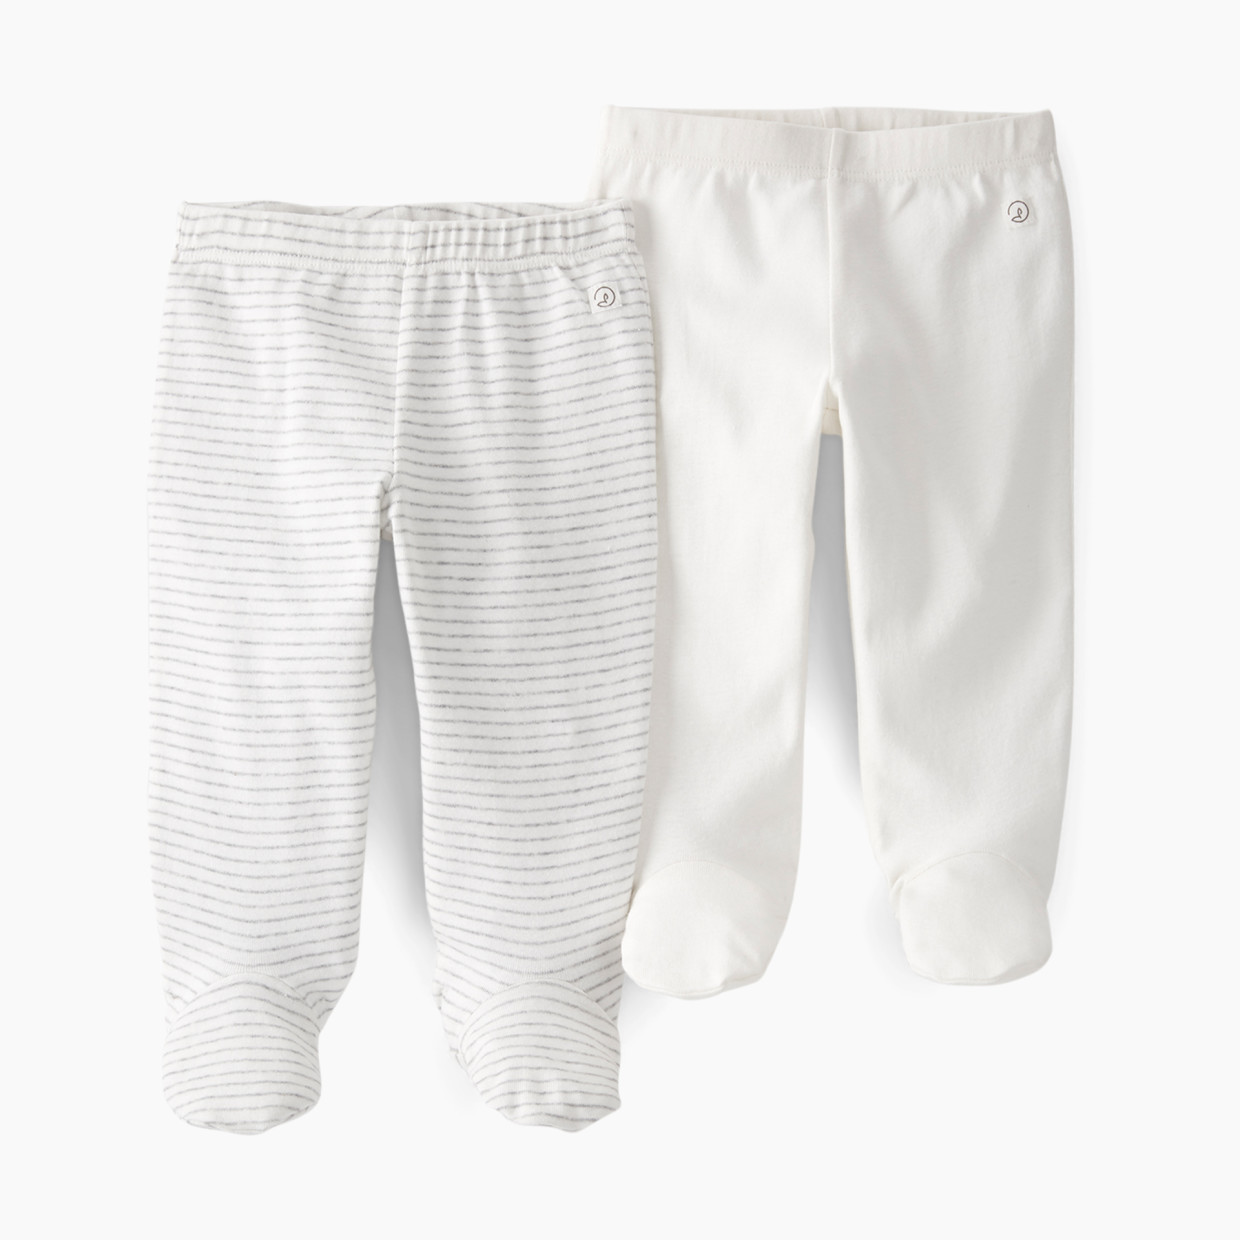 Carter's Little Planet Organic Cotton Rib Footed Pants (2 Pack) - Cream, Nb.